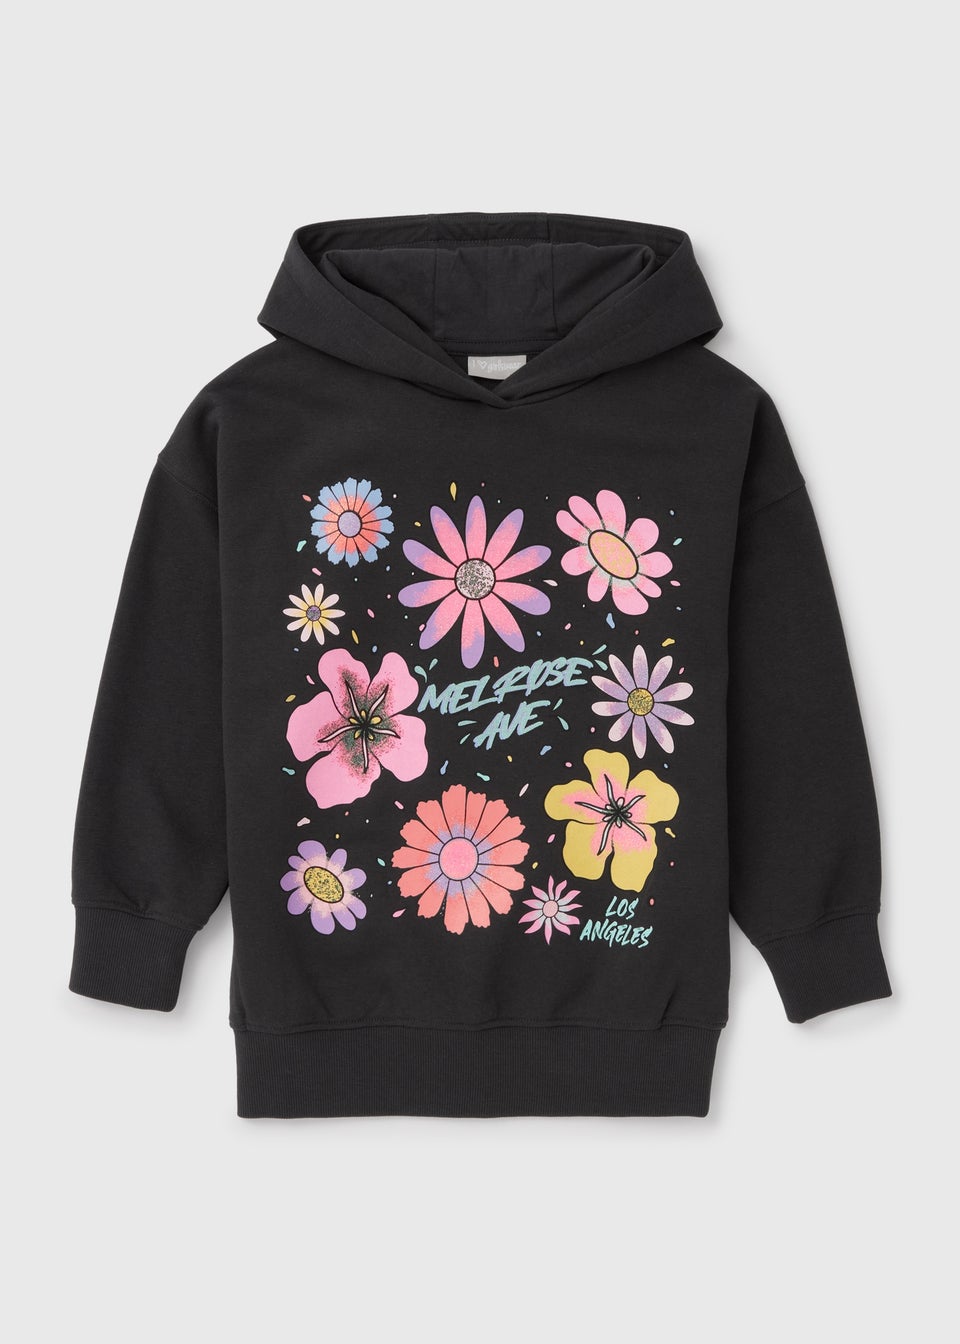 Girls Melrose Ave Charcoal Oversized Hoodie (7-15yrs)